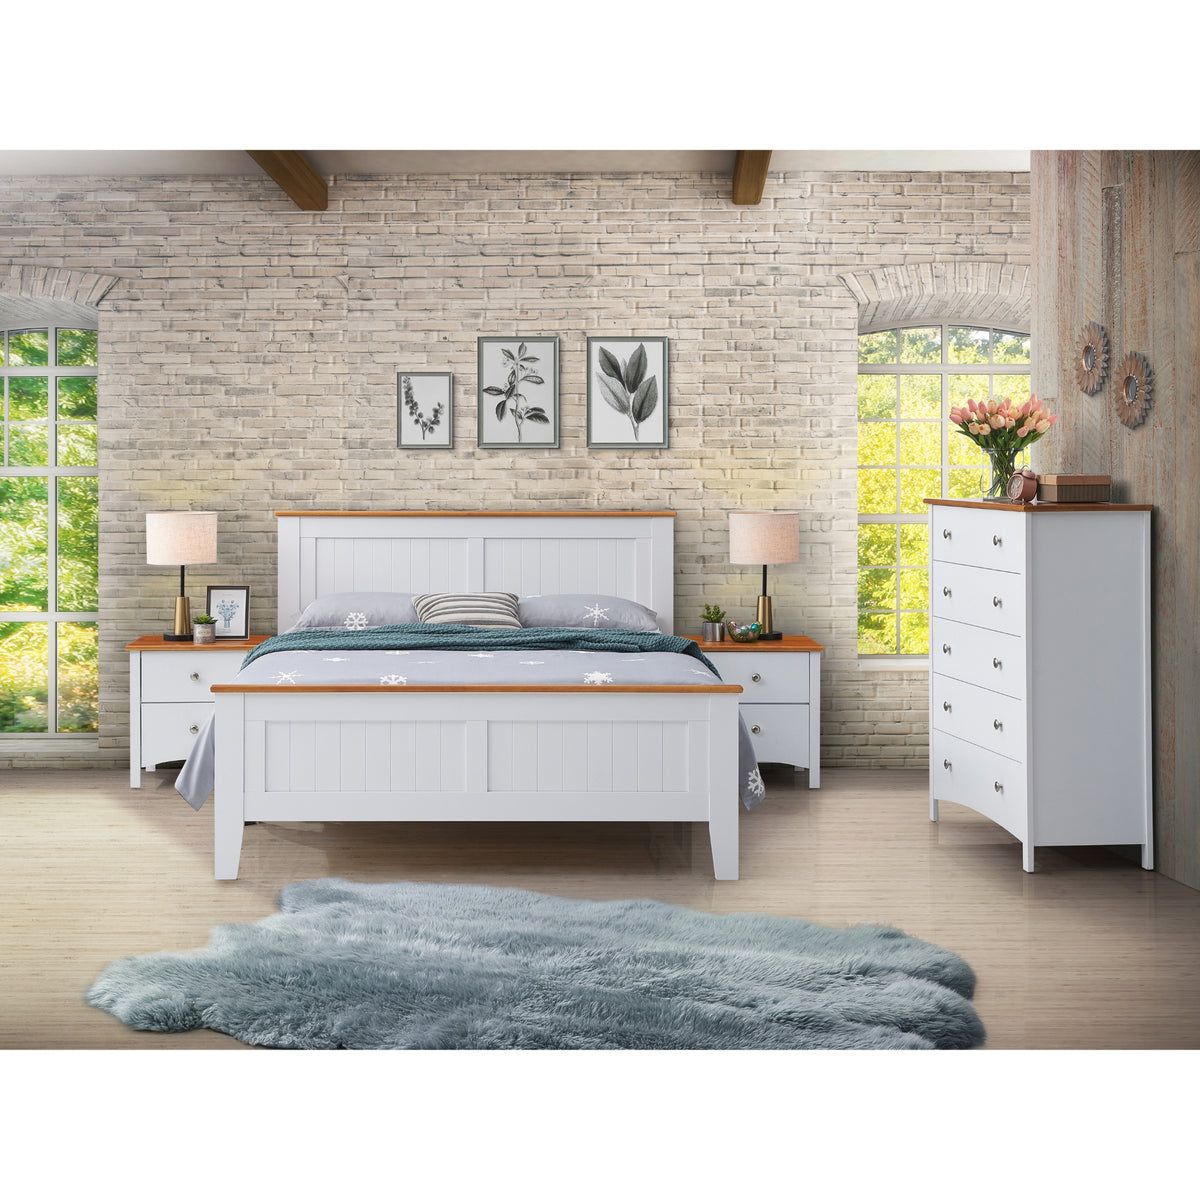 Lobelia Tallboy 5 Chest of Drawers Solid Rubber Wood Bed Storage Cabinet - White